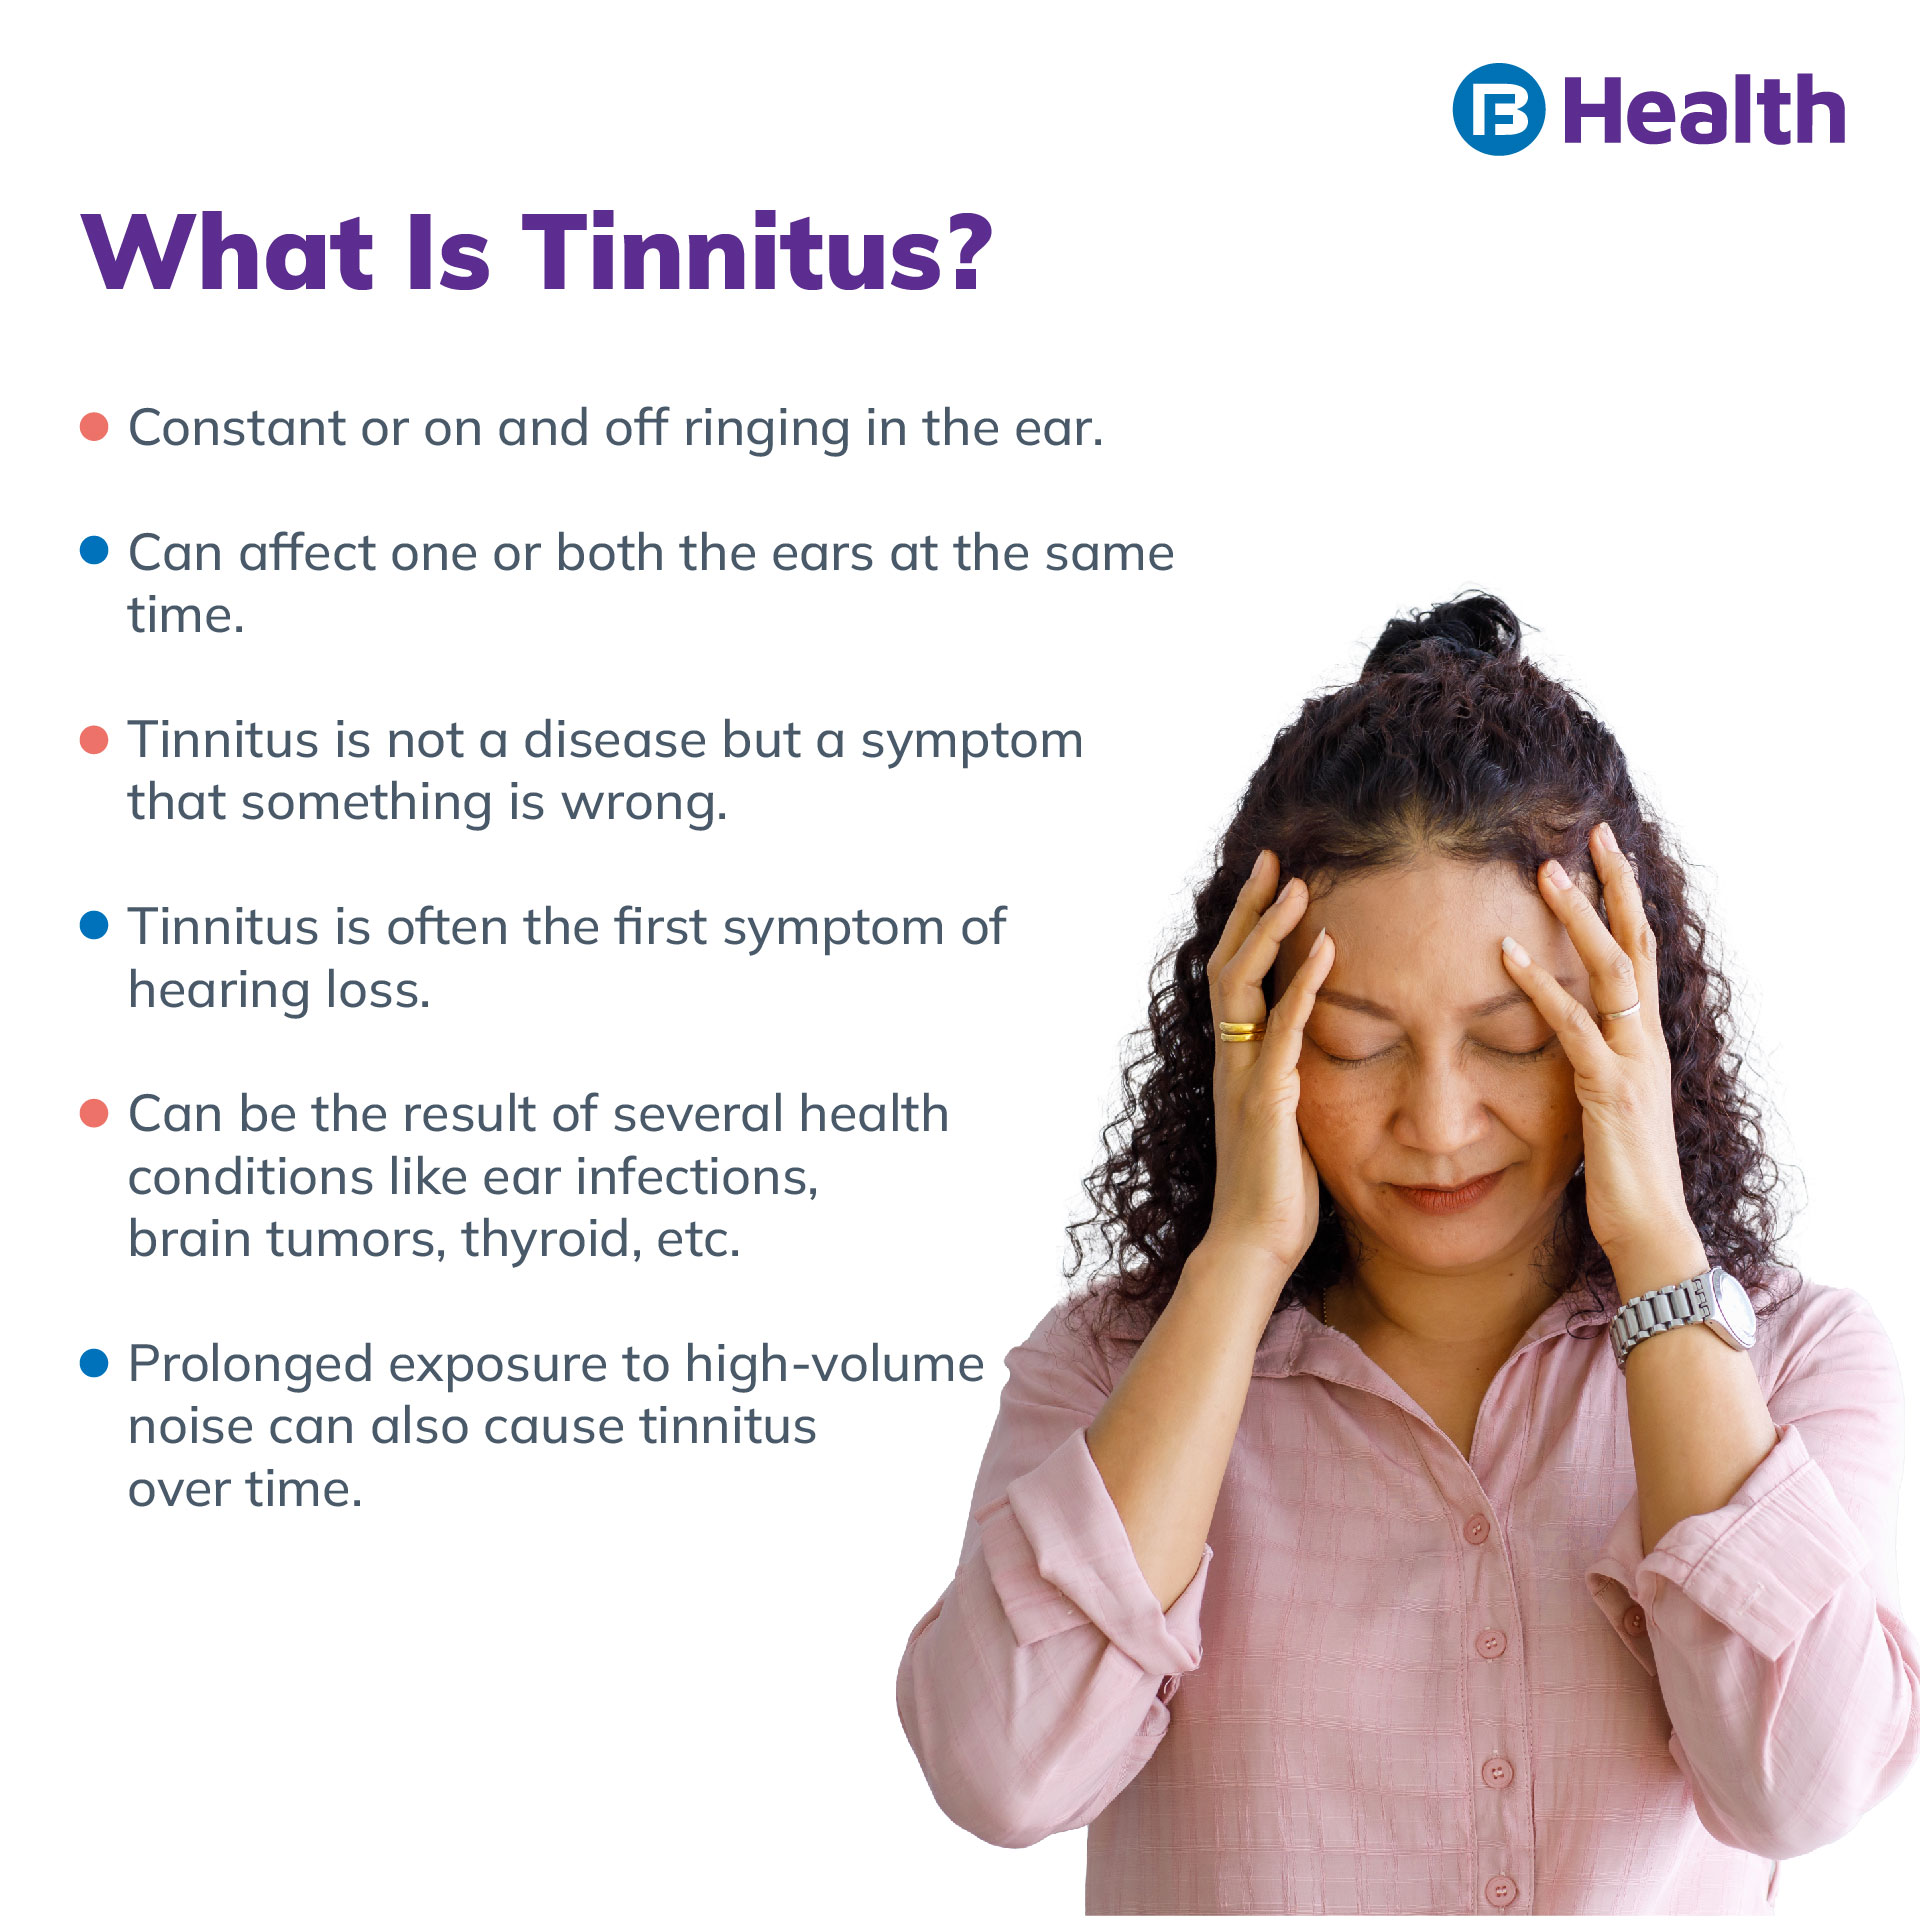 Is Tinnitus a Permanent Condition or Can it go Away in Time?